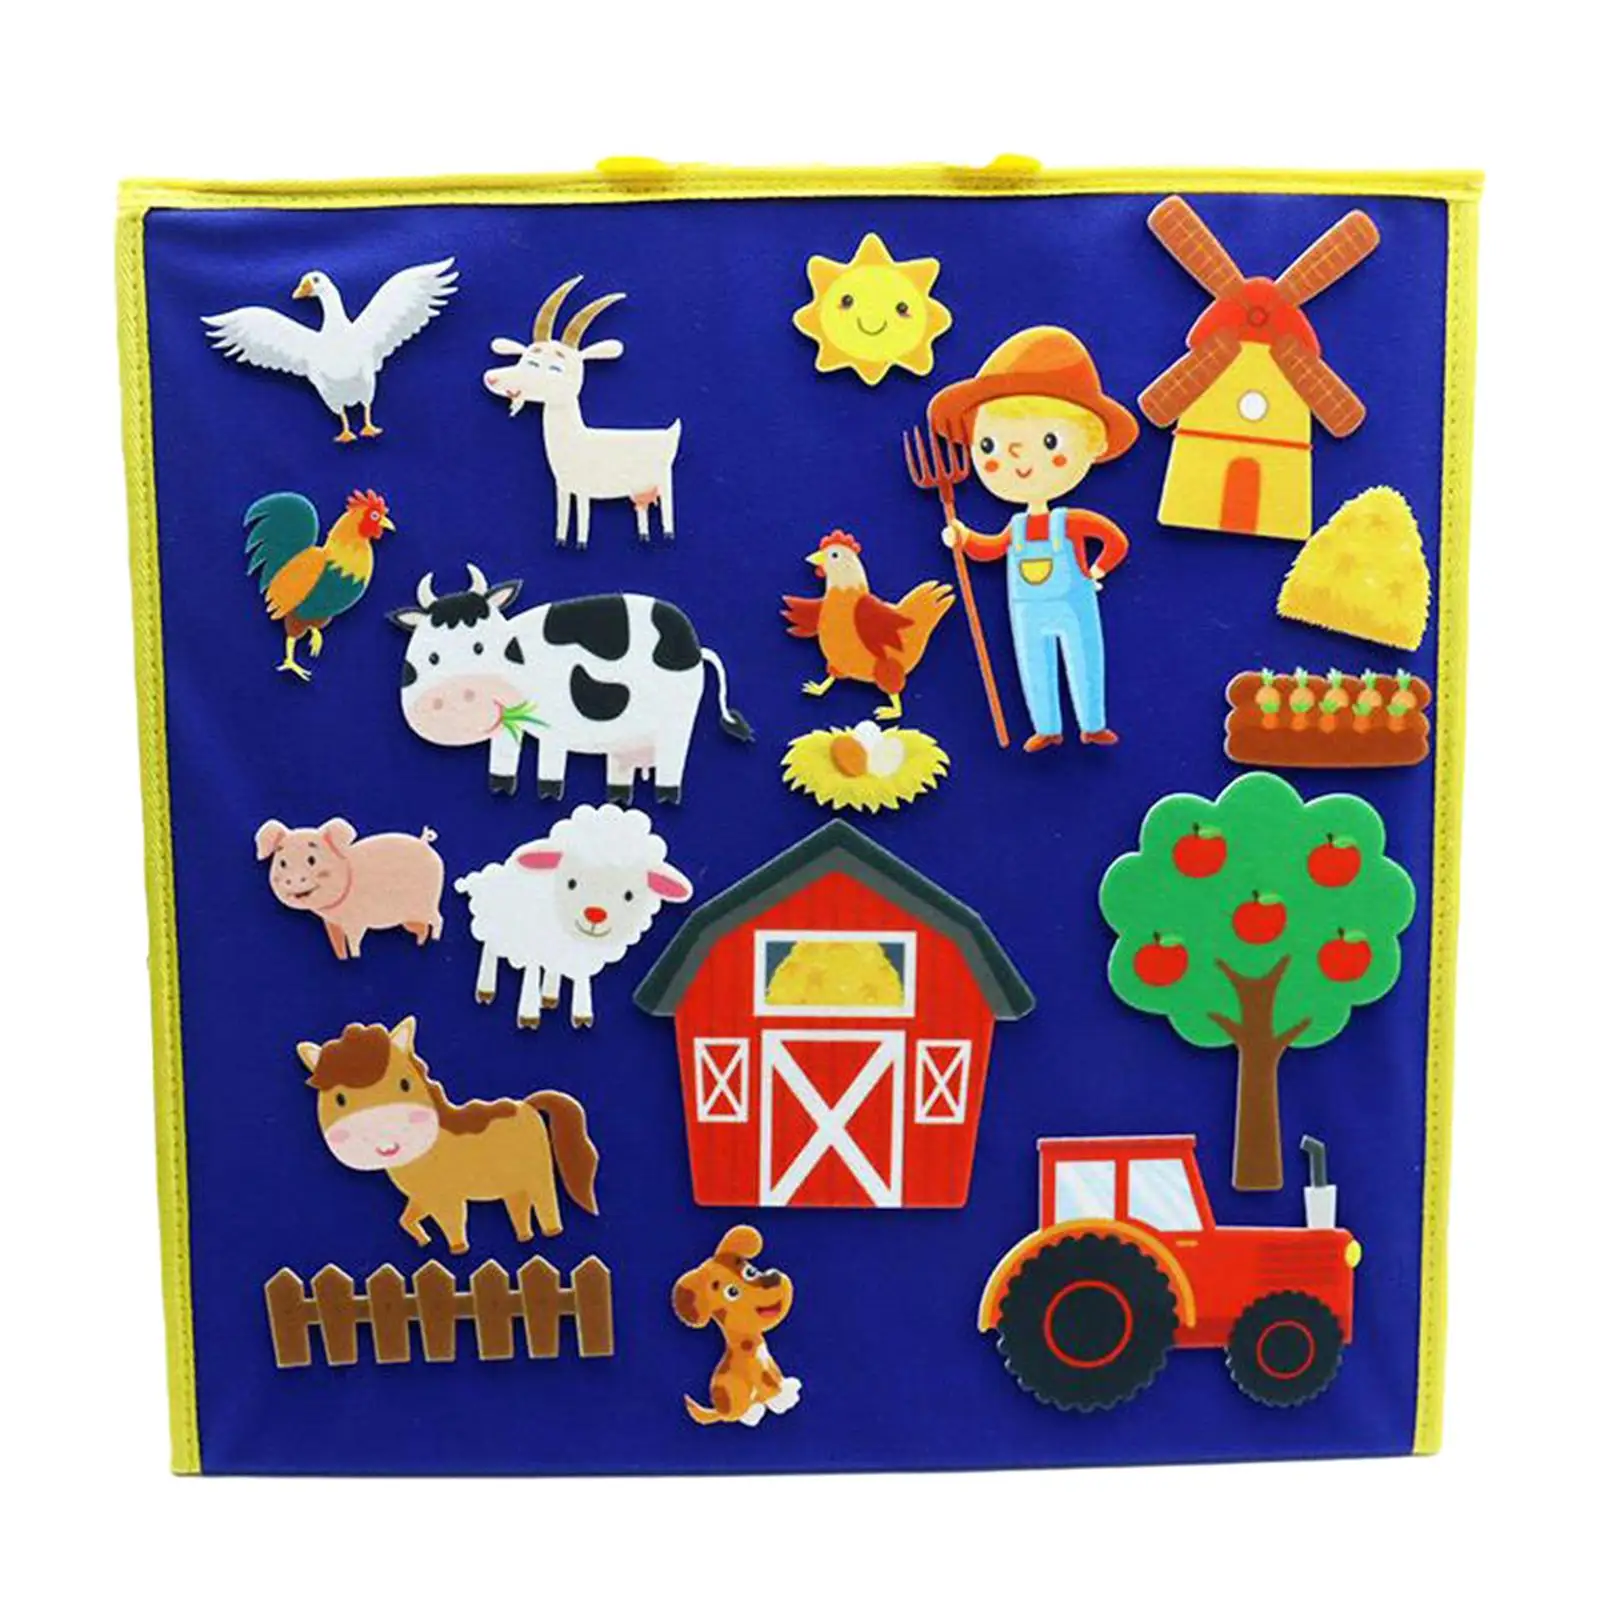 Felt Flannel Board Quiet Book for Kids Household Interactive Playset Party Montessori Arts and Crafts Felt Board for Toddlers